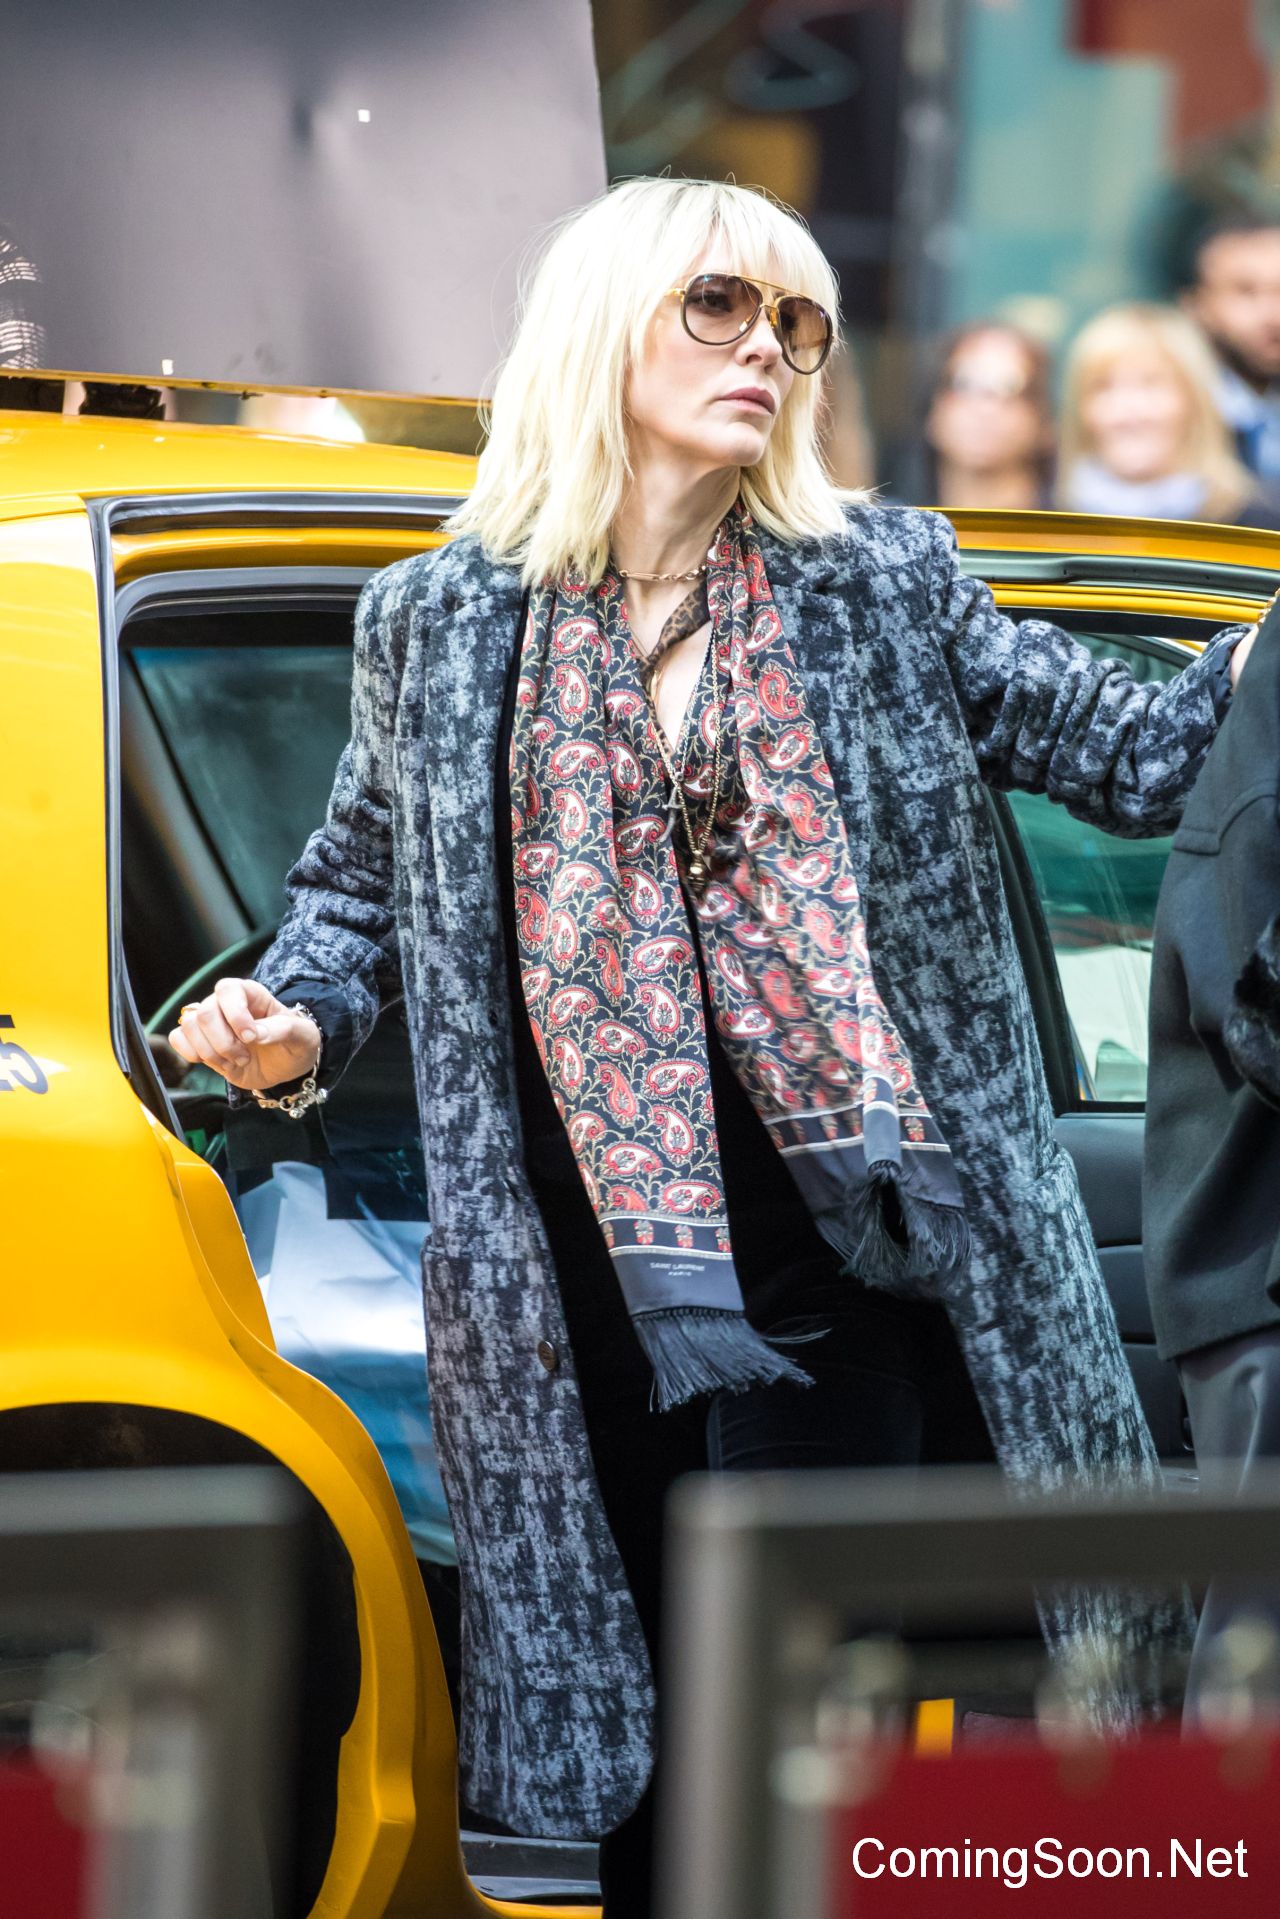 'Ocean's Eight' filming in Midtown New York Featuring: Cate Blanchett Where: NY, New York, United States When: 26 Oct 2016 Credit: WENN.com